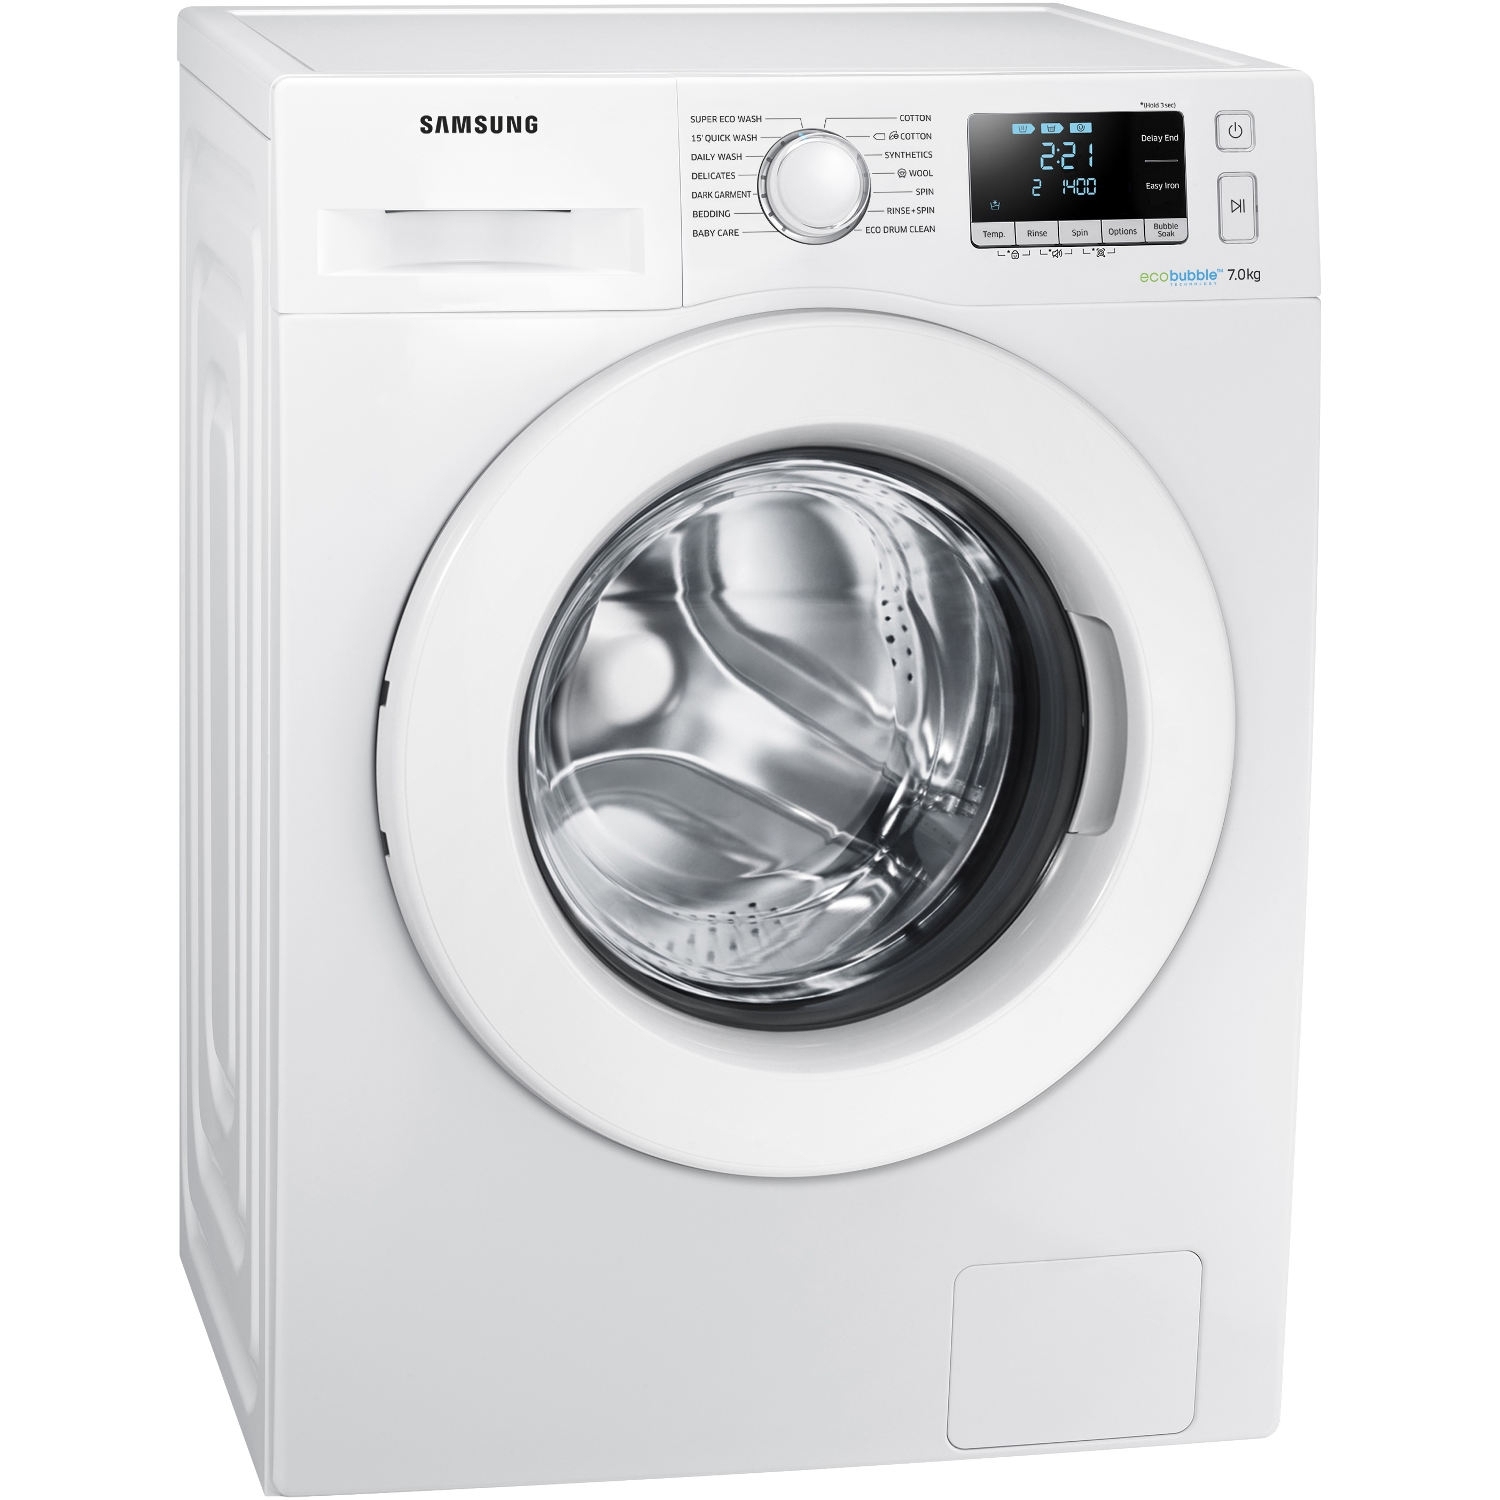 Samsung 7kg 1400 Spin Washing Machine - White - A+++ Rated - 0